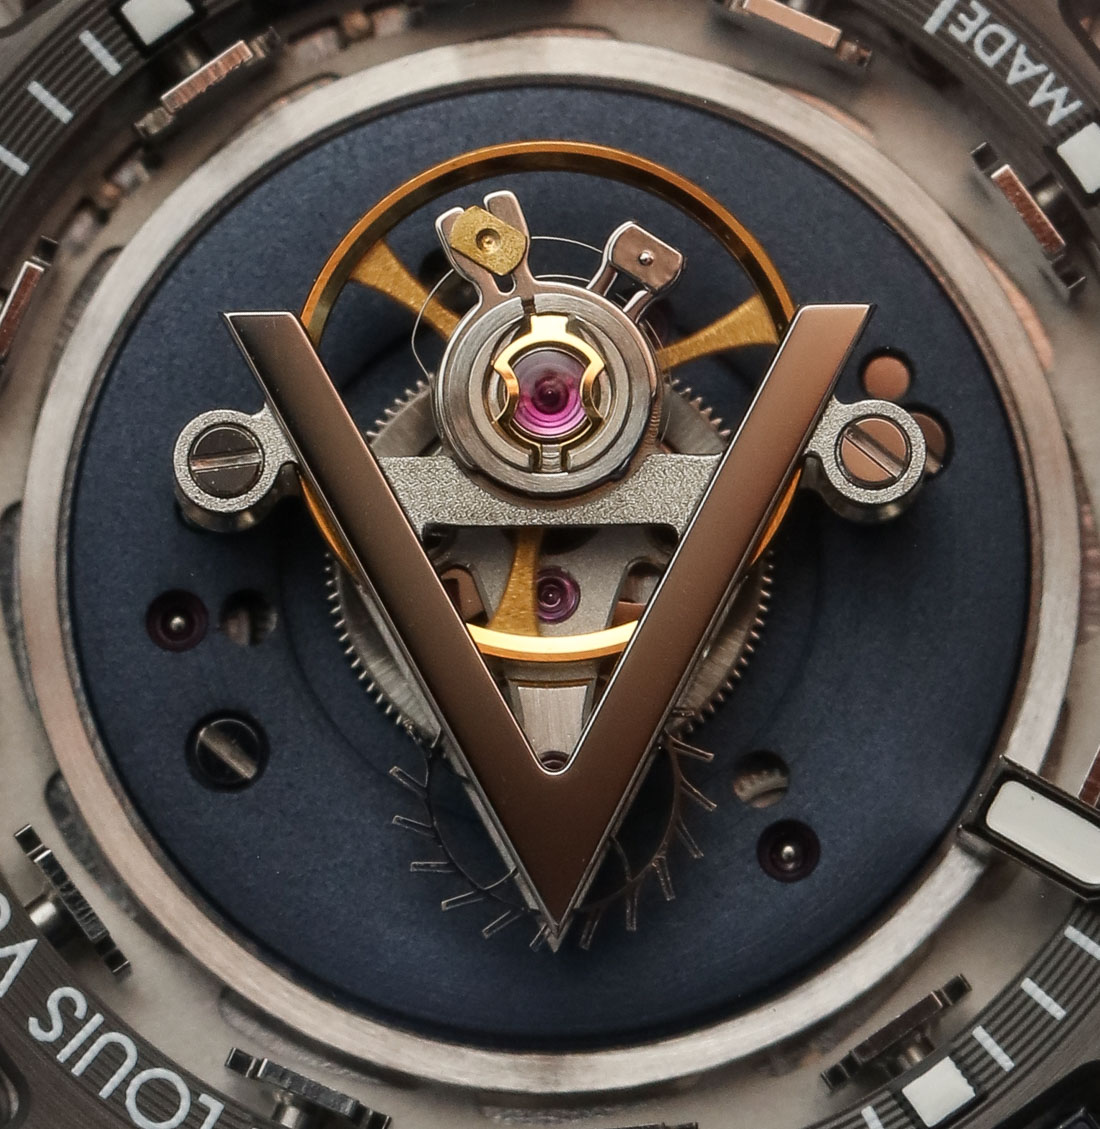 Normaly I don't like Louis Vuitton. Normaly The Escale Spin Time  Tourbillon Central Blue - Universal Launcher faces - Full Android Watch